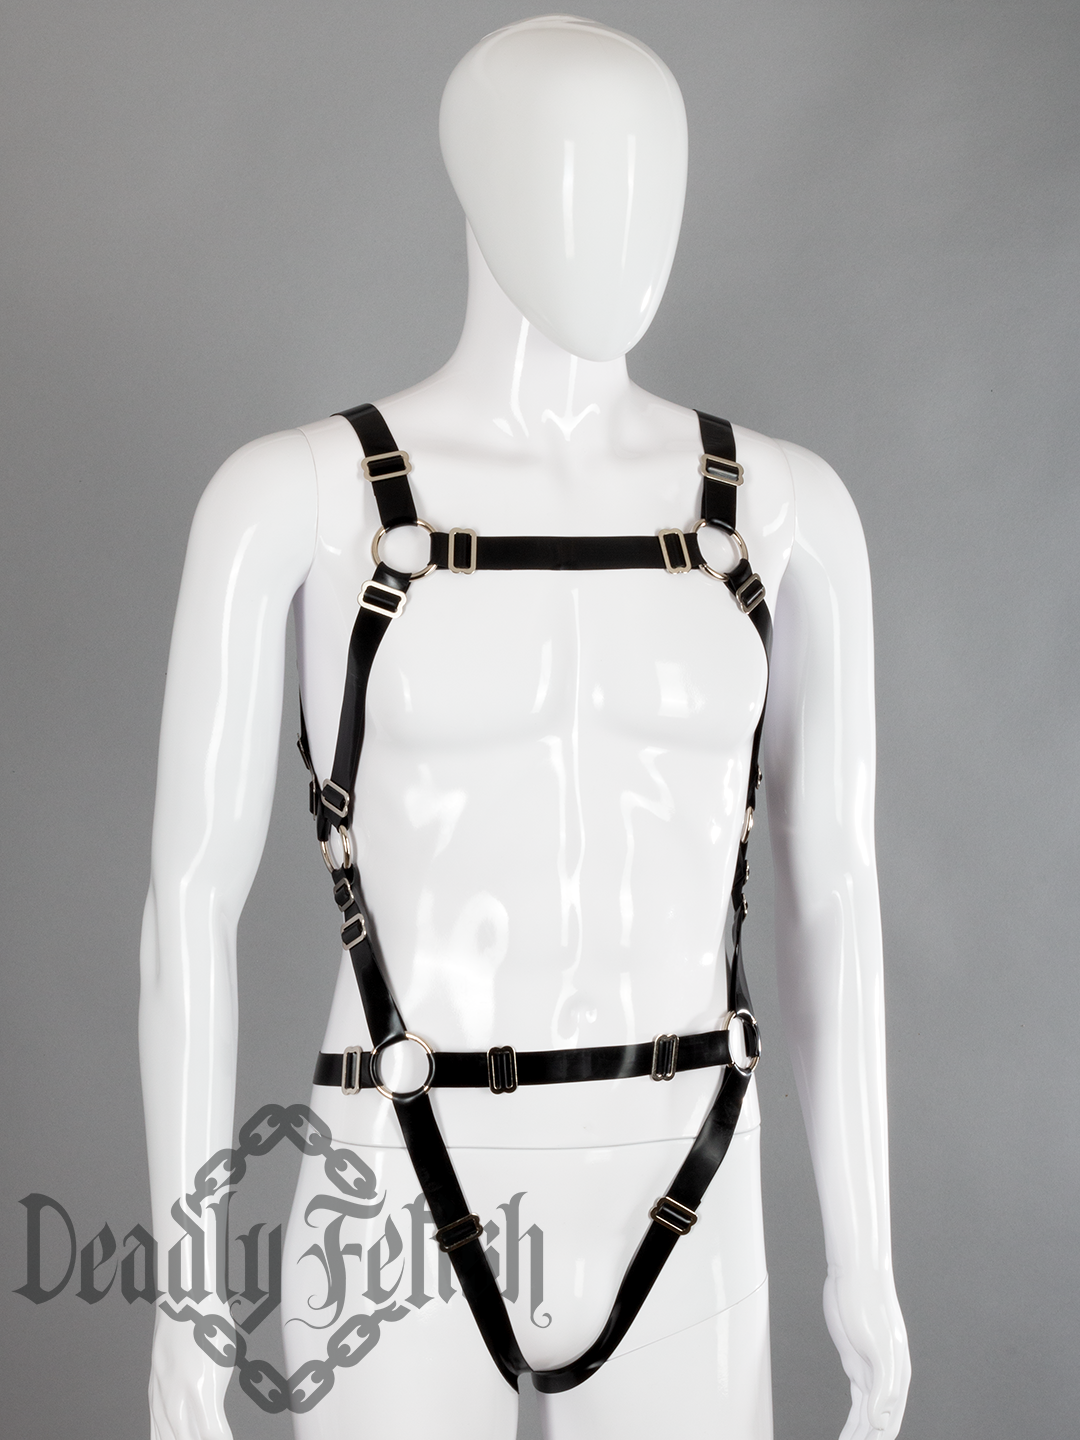 Deadly Fetish Made-to-Order Latex: Basic Harness #25